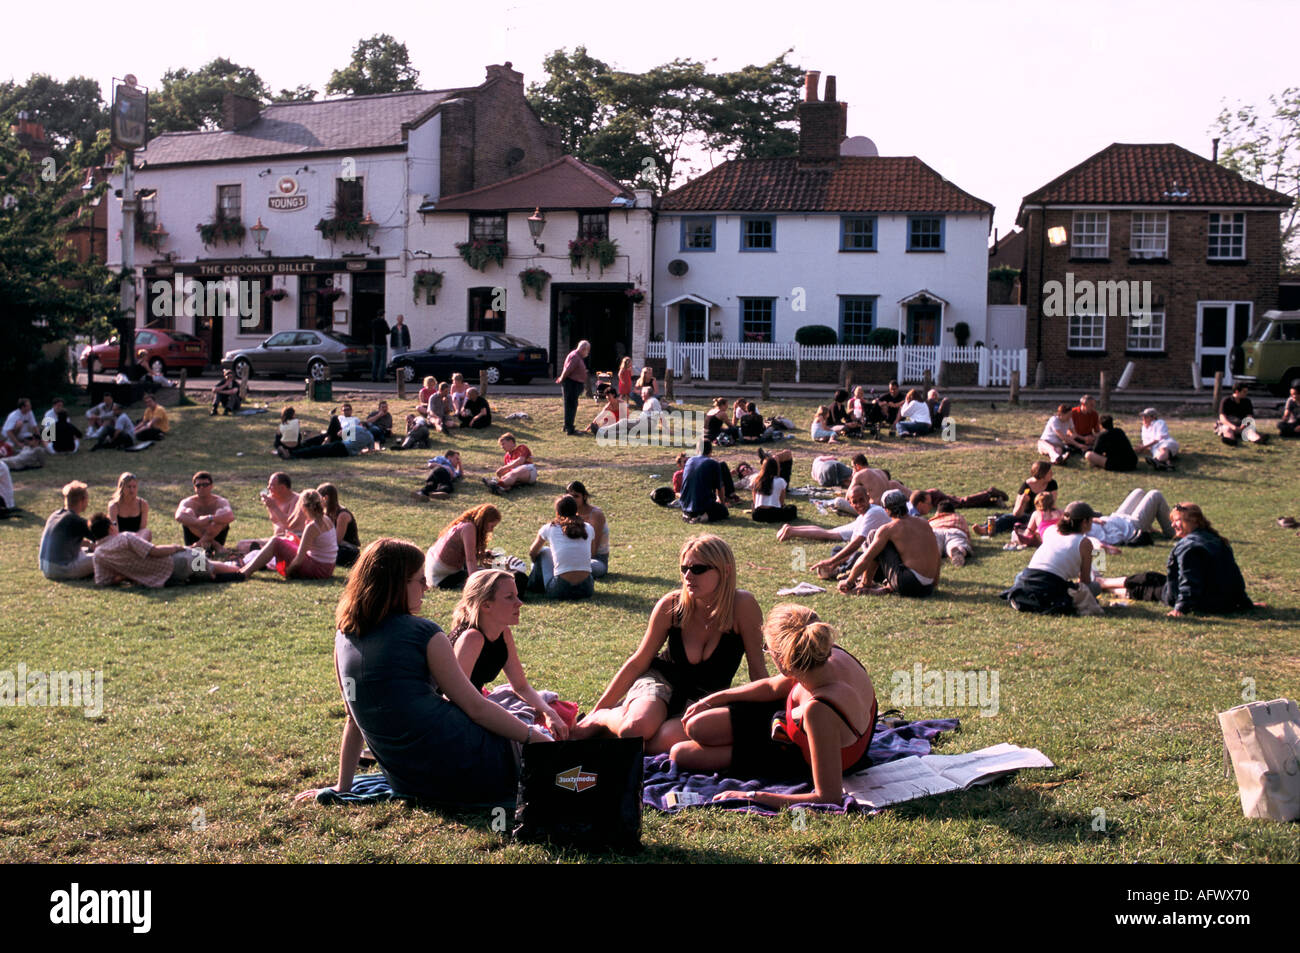 London pubs. A summer drink Wimbledon Common pub group friends sitting on lawns outside the Crooked Billet London SW19 UK 2000s 2001 HOMER SYKES Stock Photo